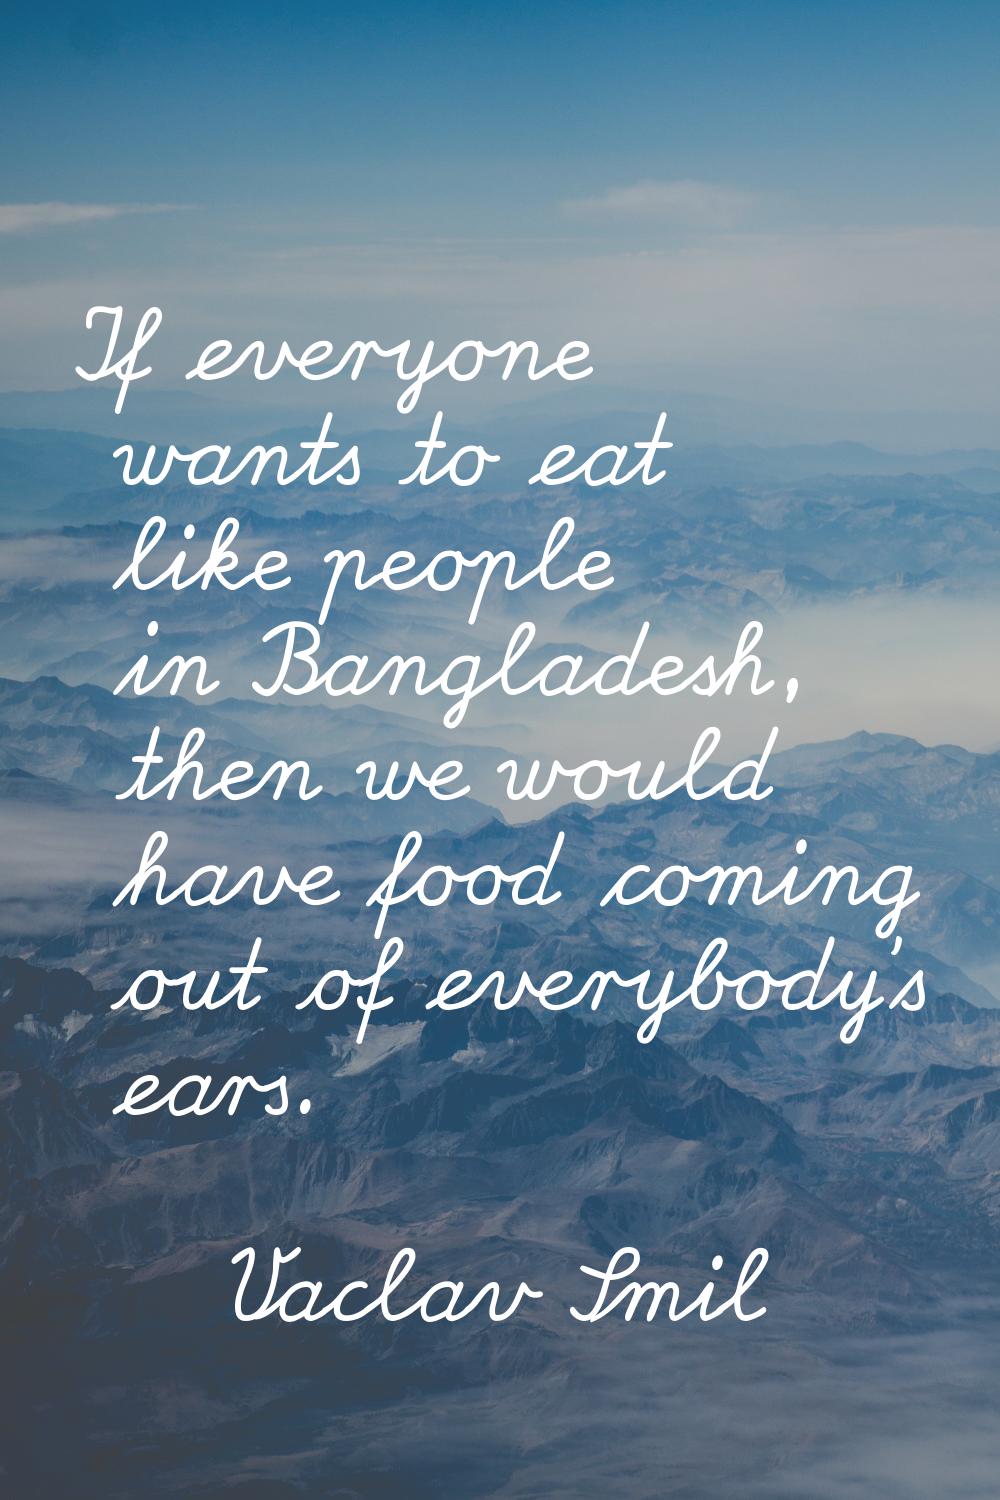 If everyone wants to eat like people in Bangladesh, then we would have food coming out of everybody